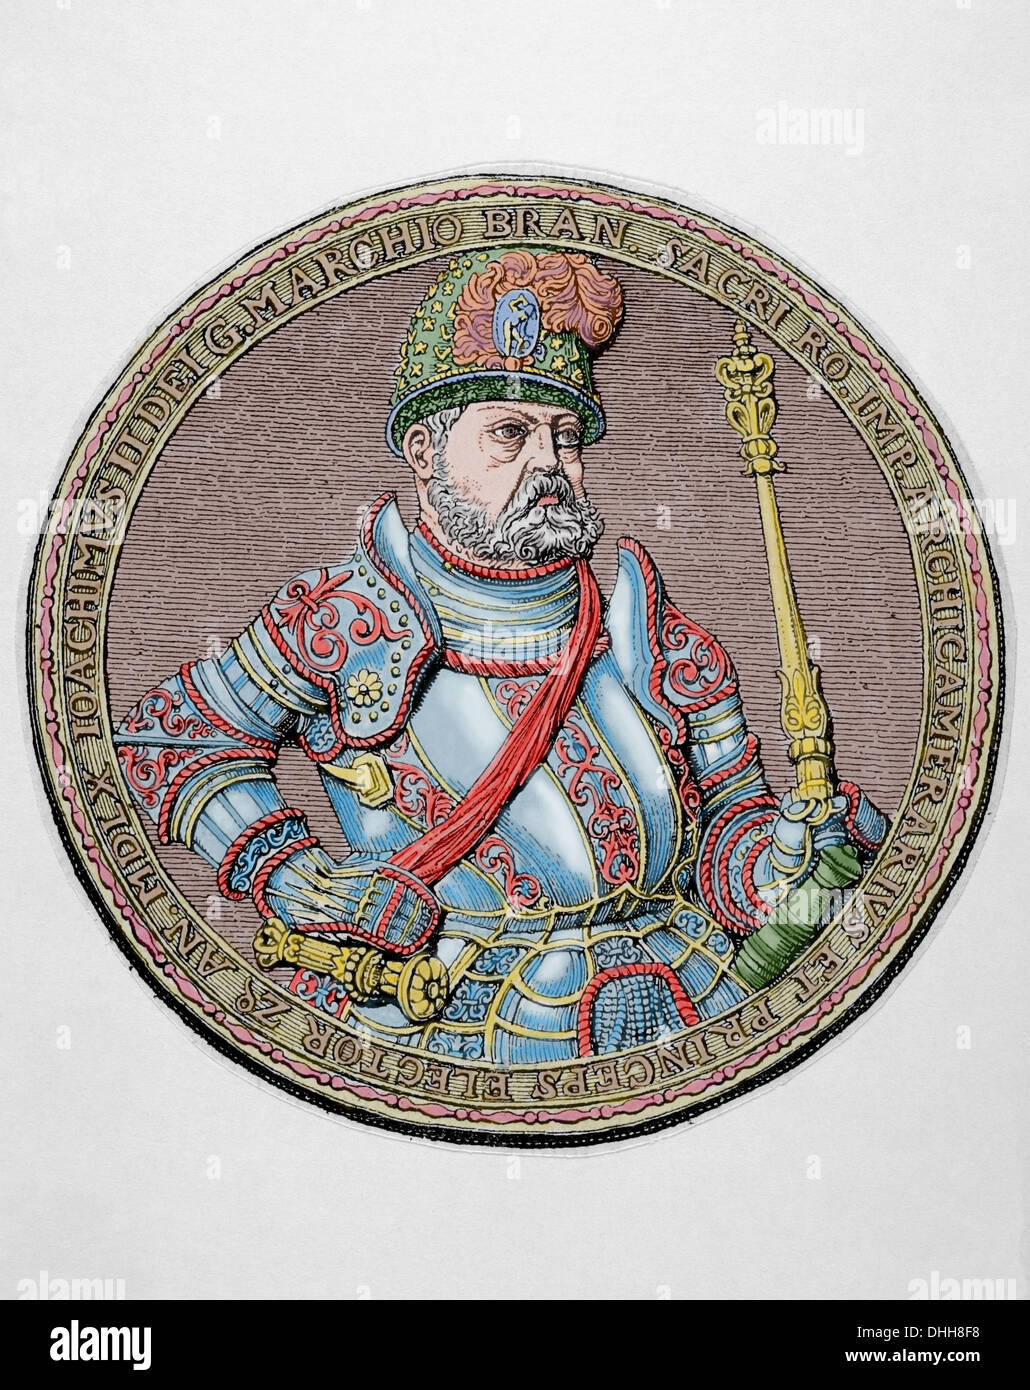 Joachim II Hector (1505-1571). Elector of Brandenburg. Member of the House of Hohenzollern. Colored engraving. Stock Photo